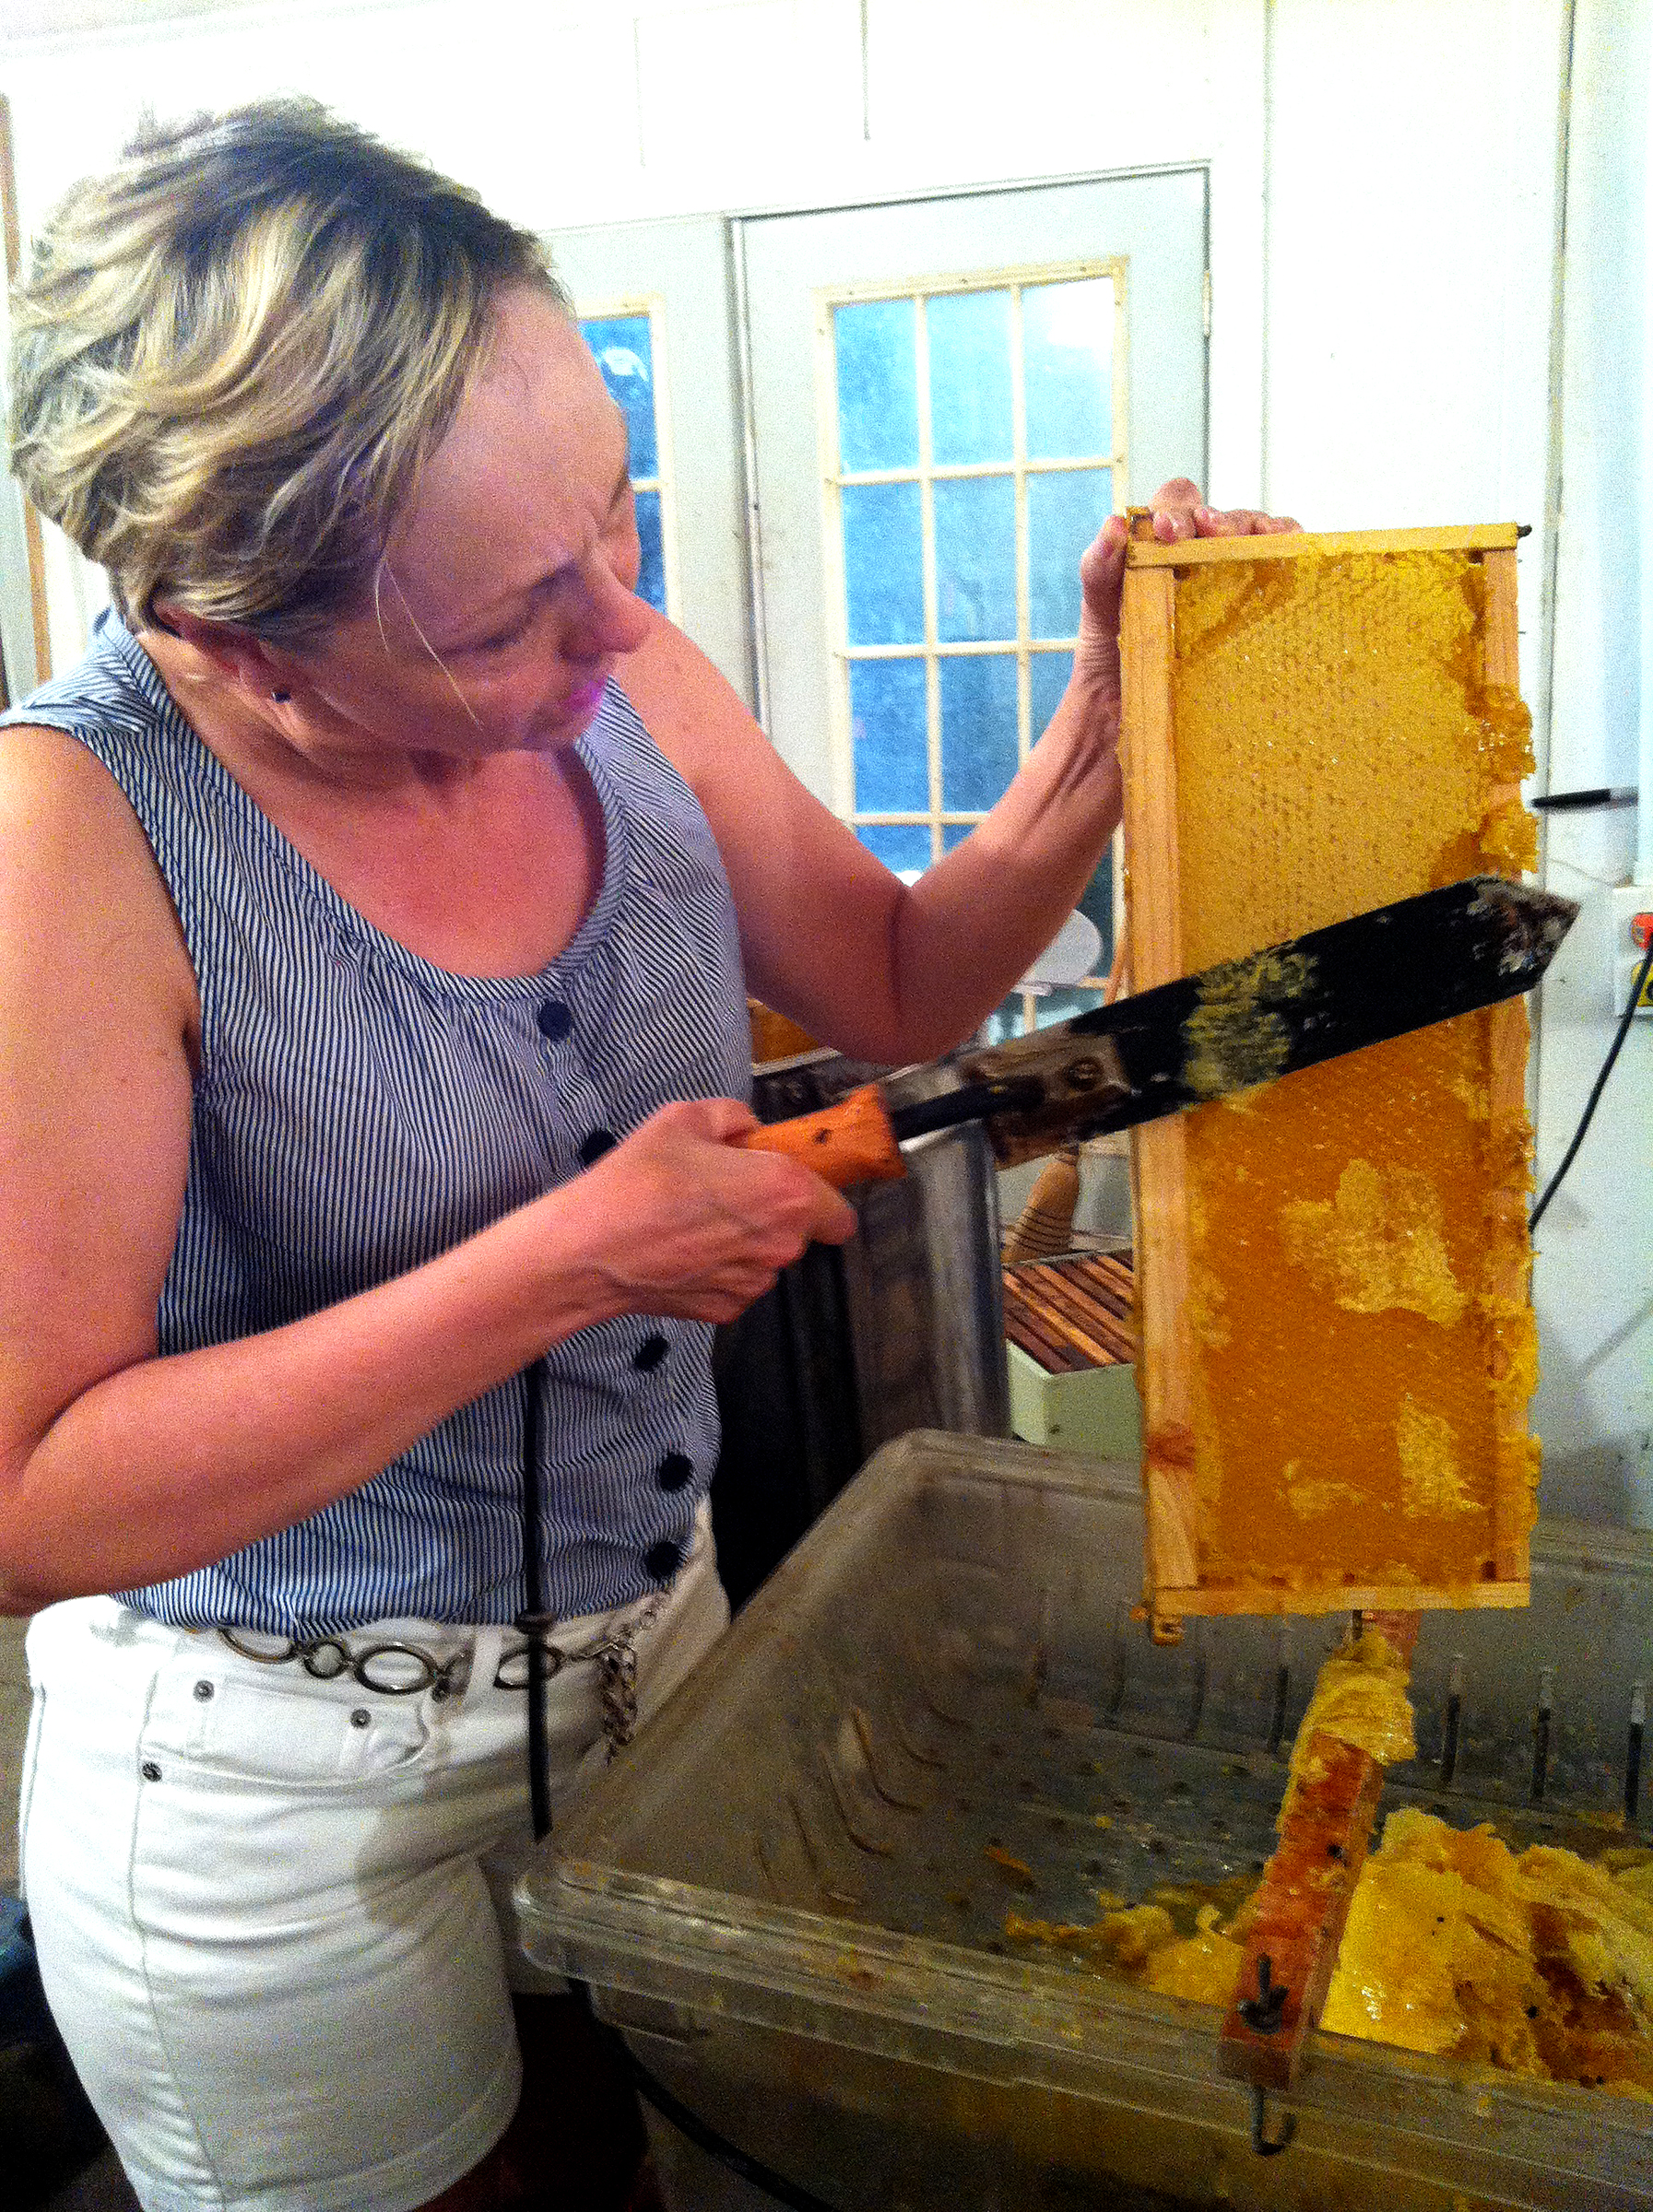 Rhonda takes her turn at cutting off the wax cappings.